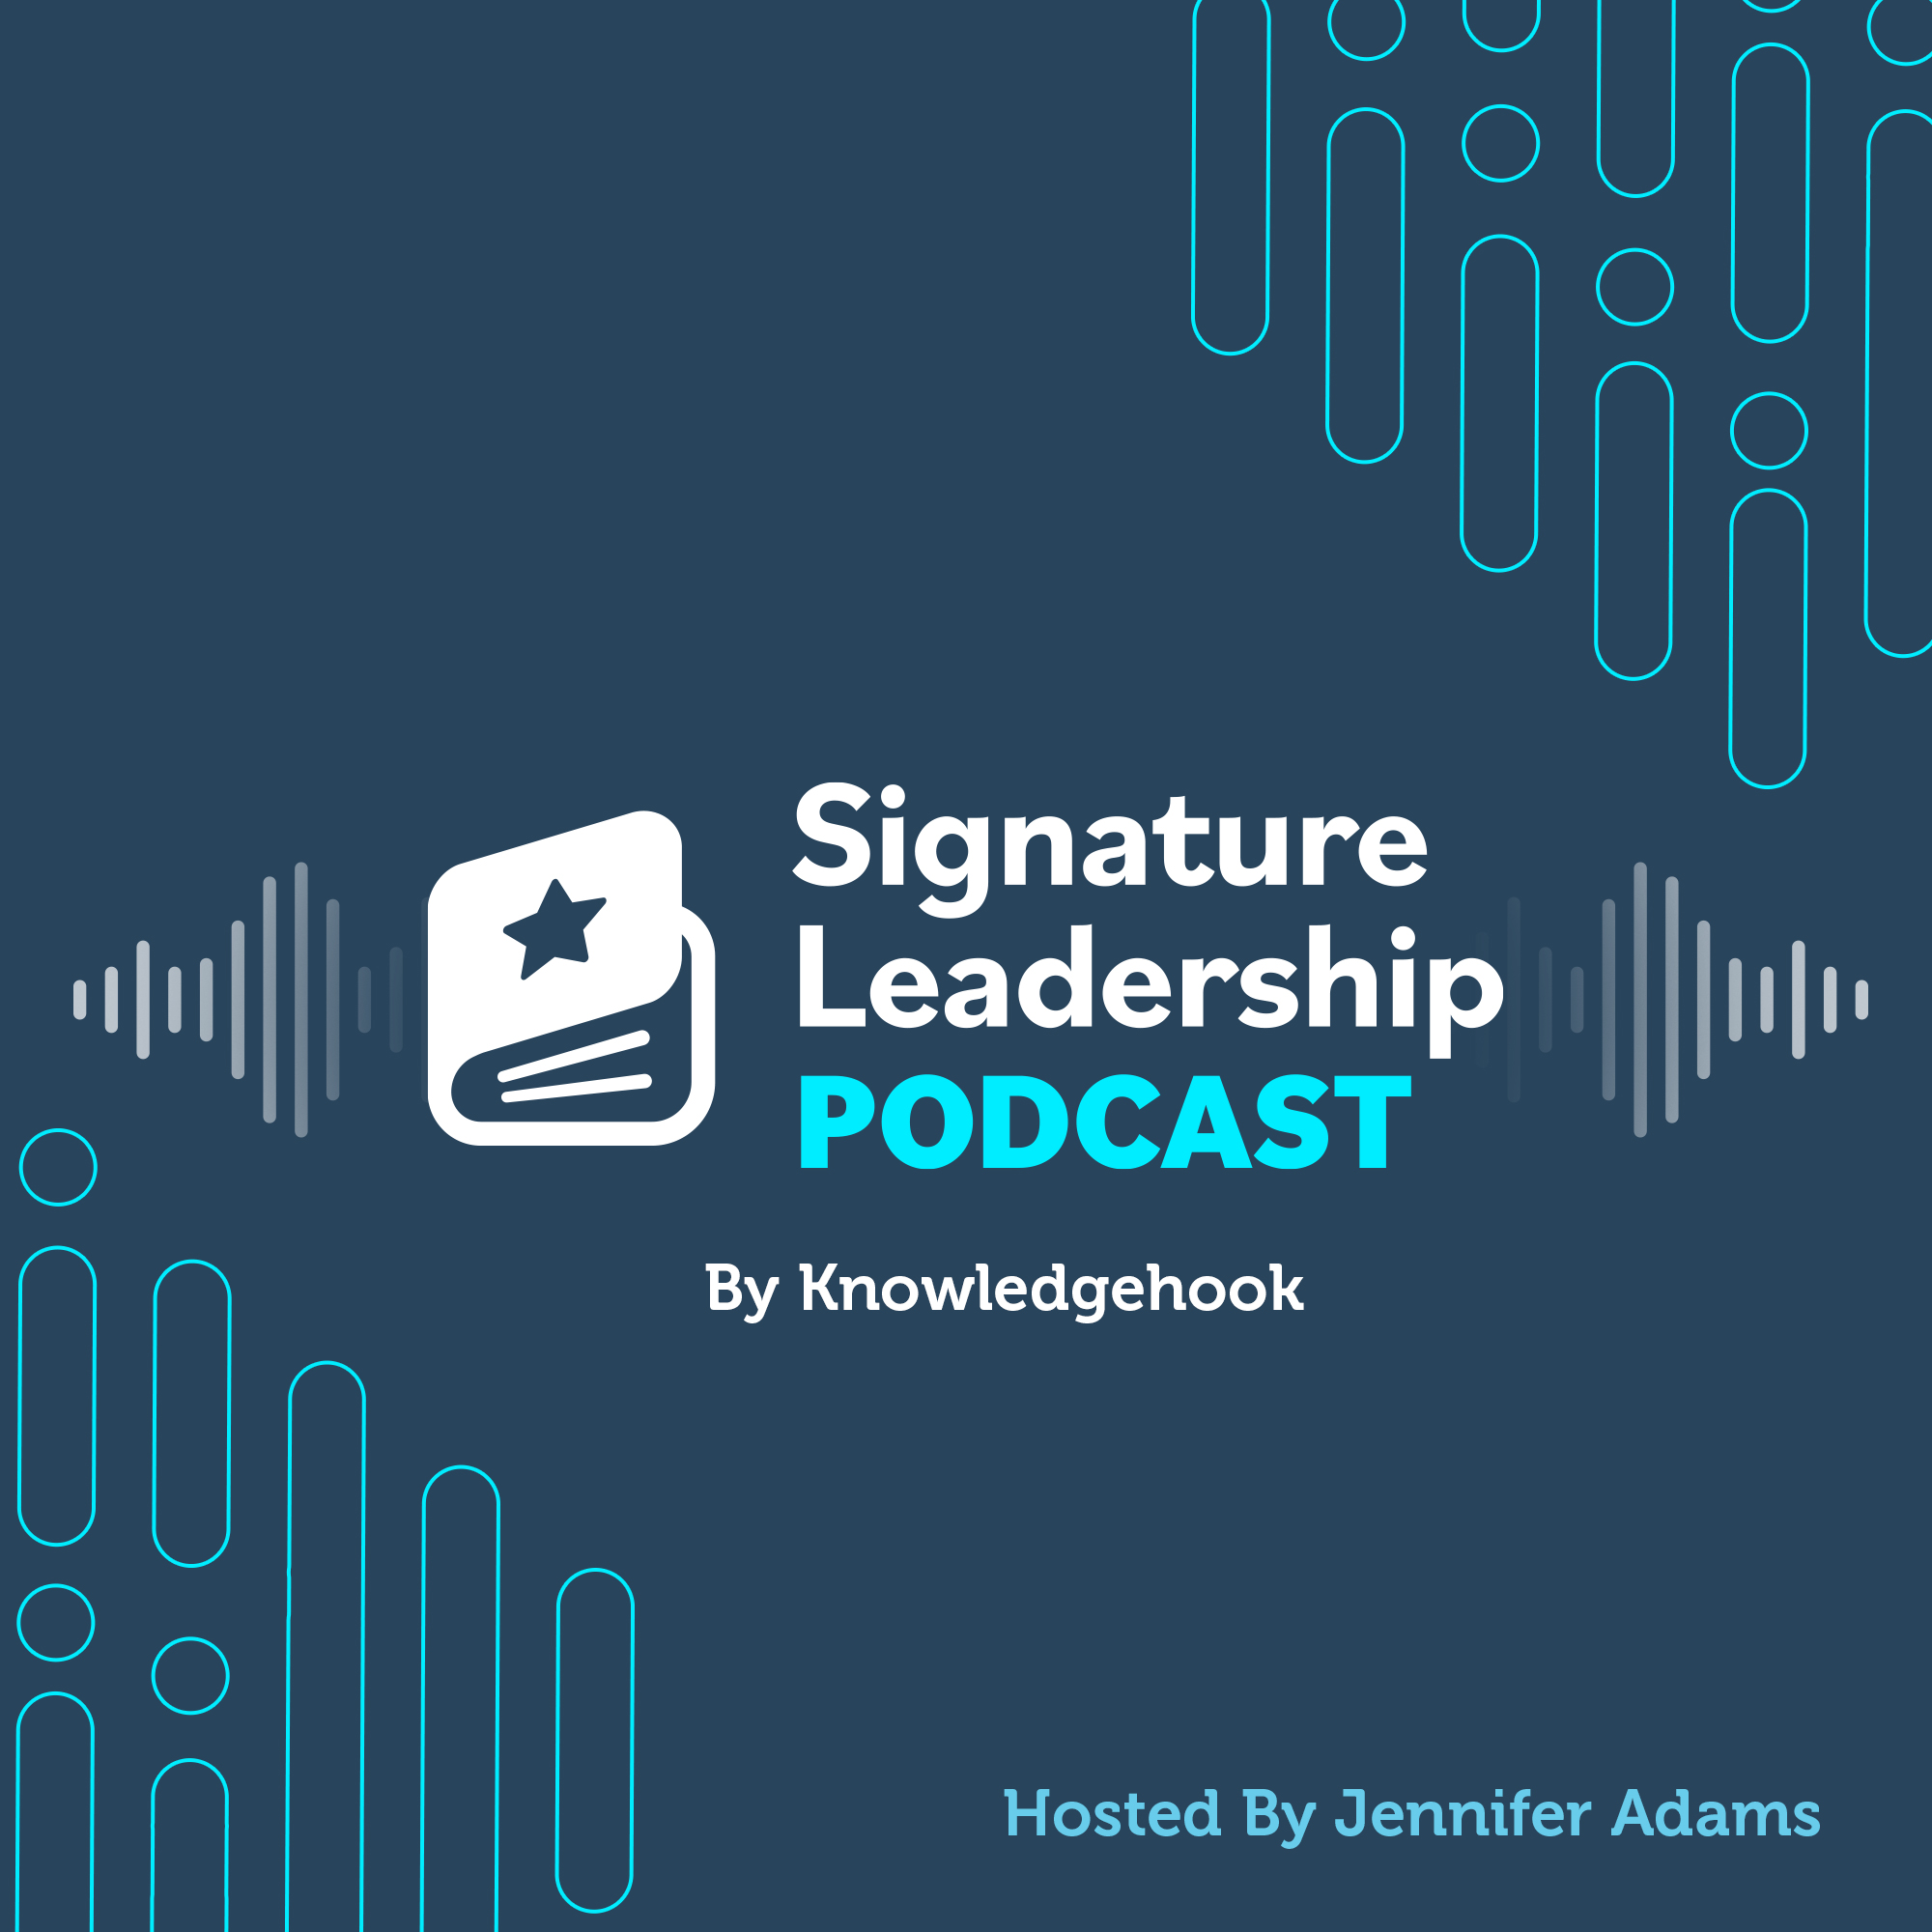 Signature Leadership Podcast by Knowledgehook